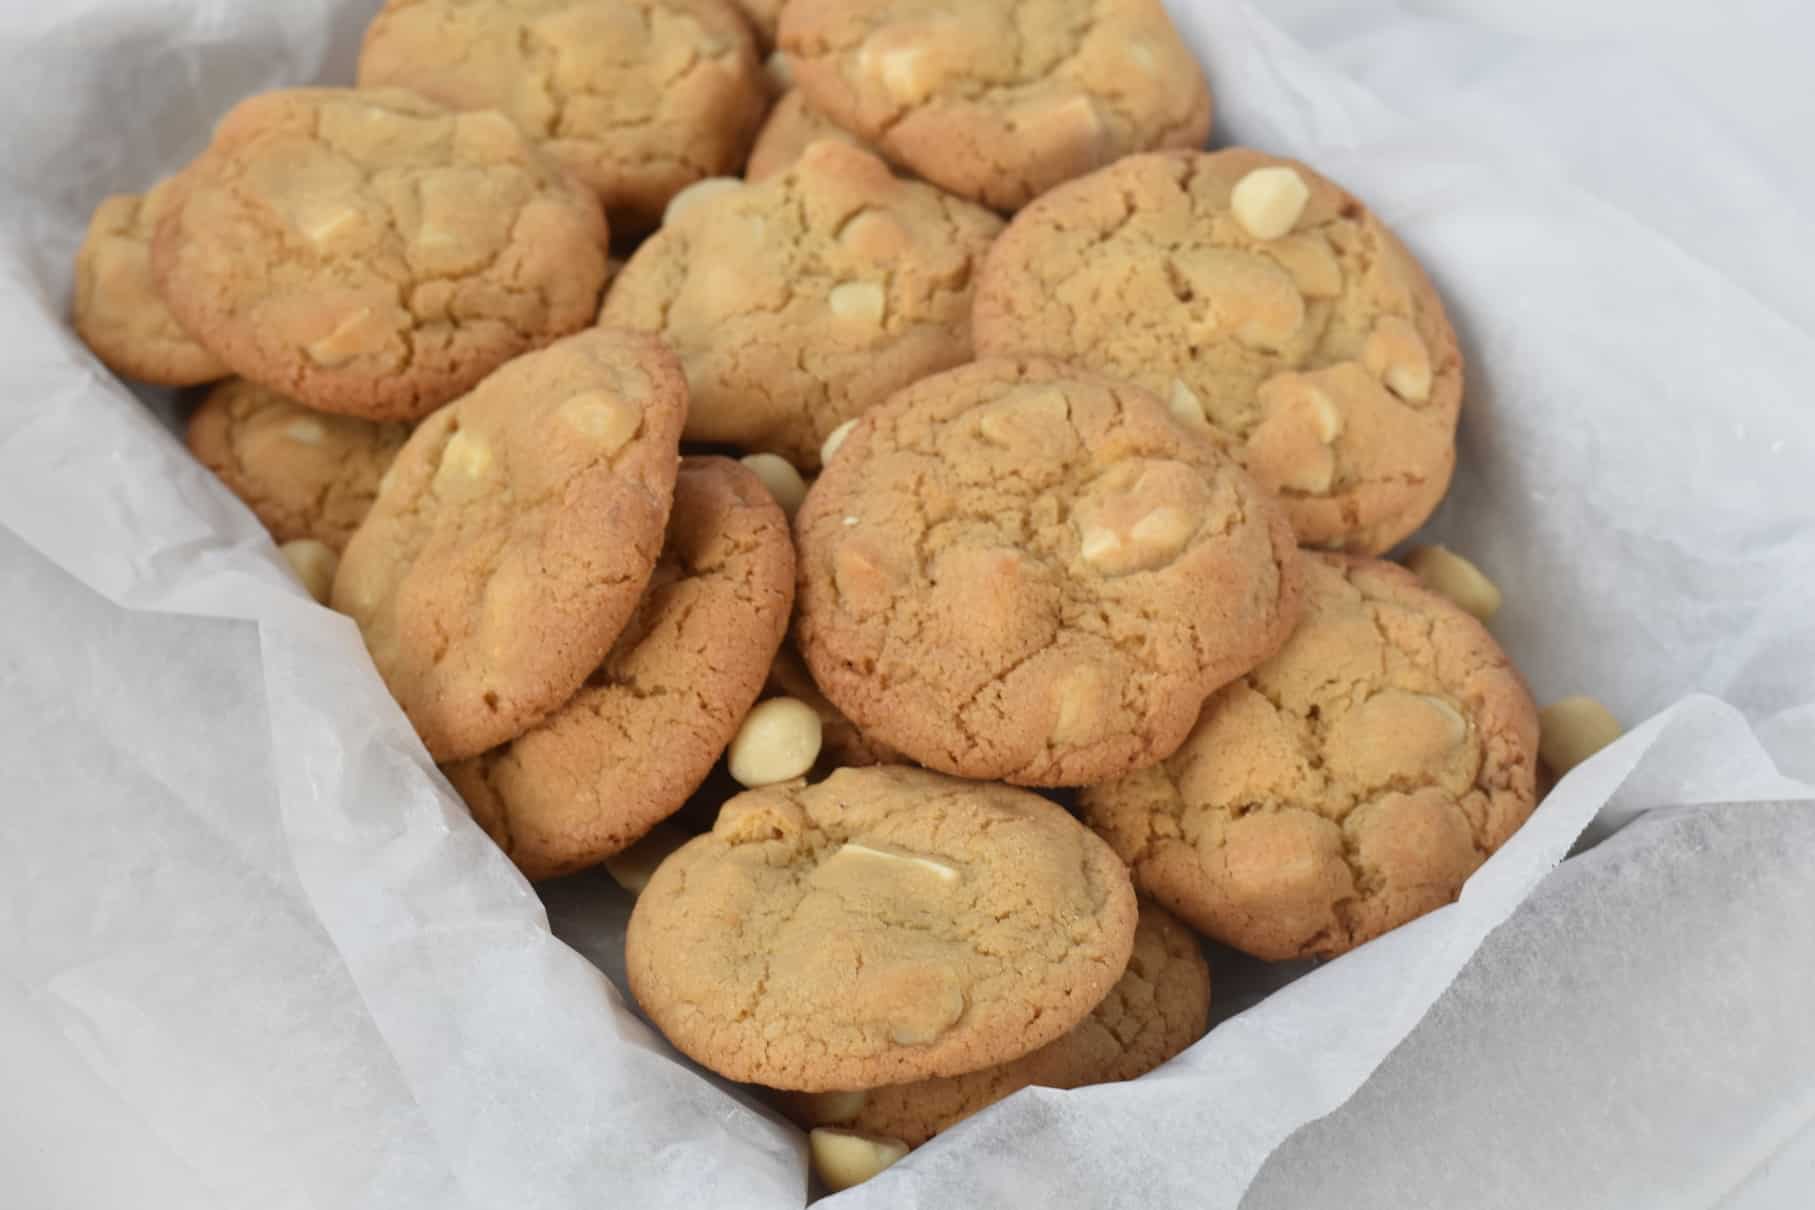 White chocolate macadamia nut cookies in baking tray.